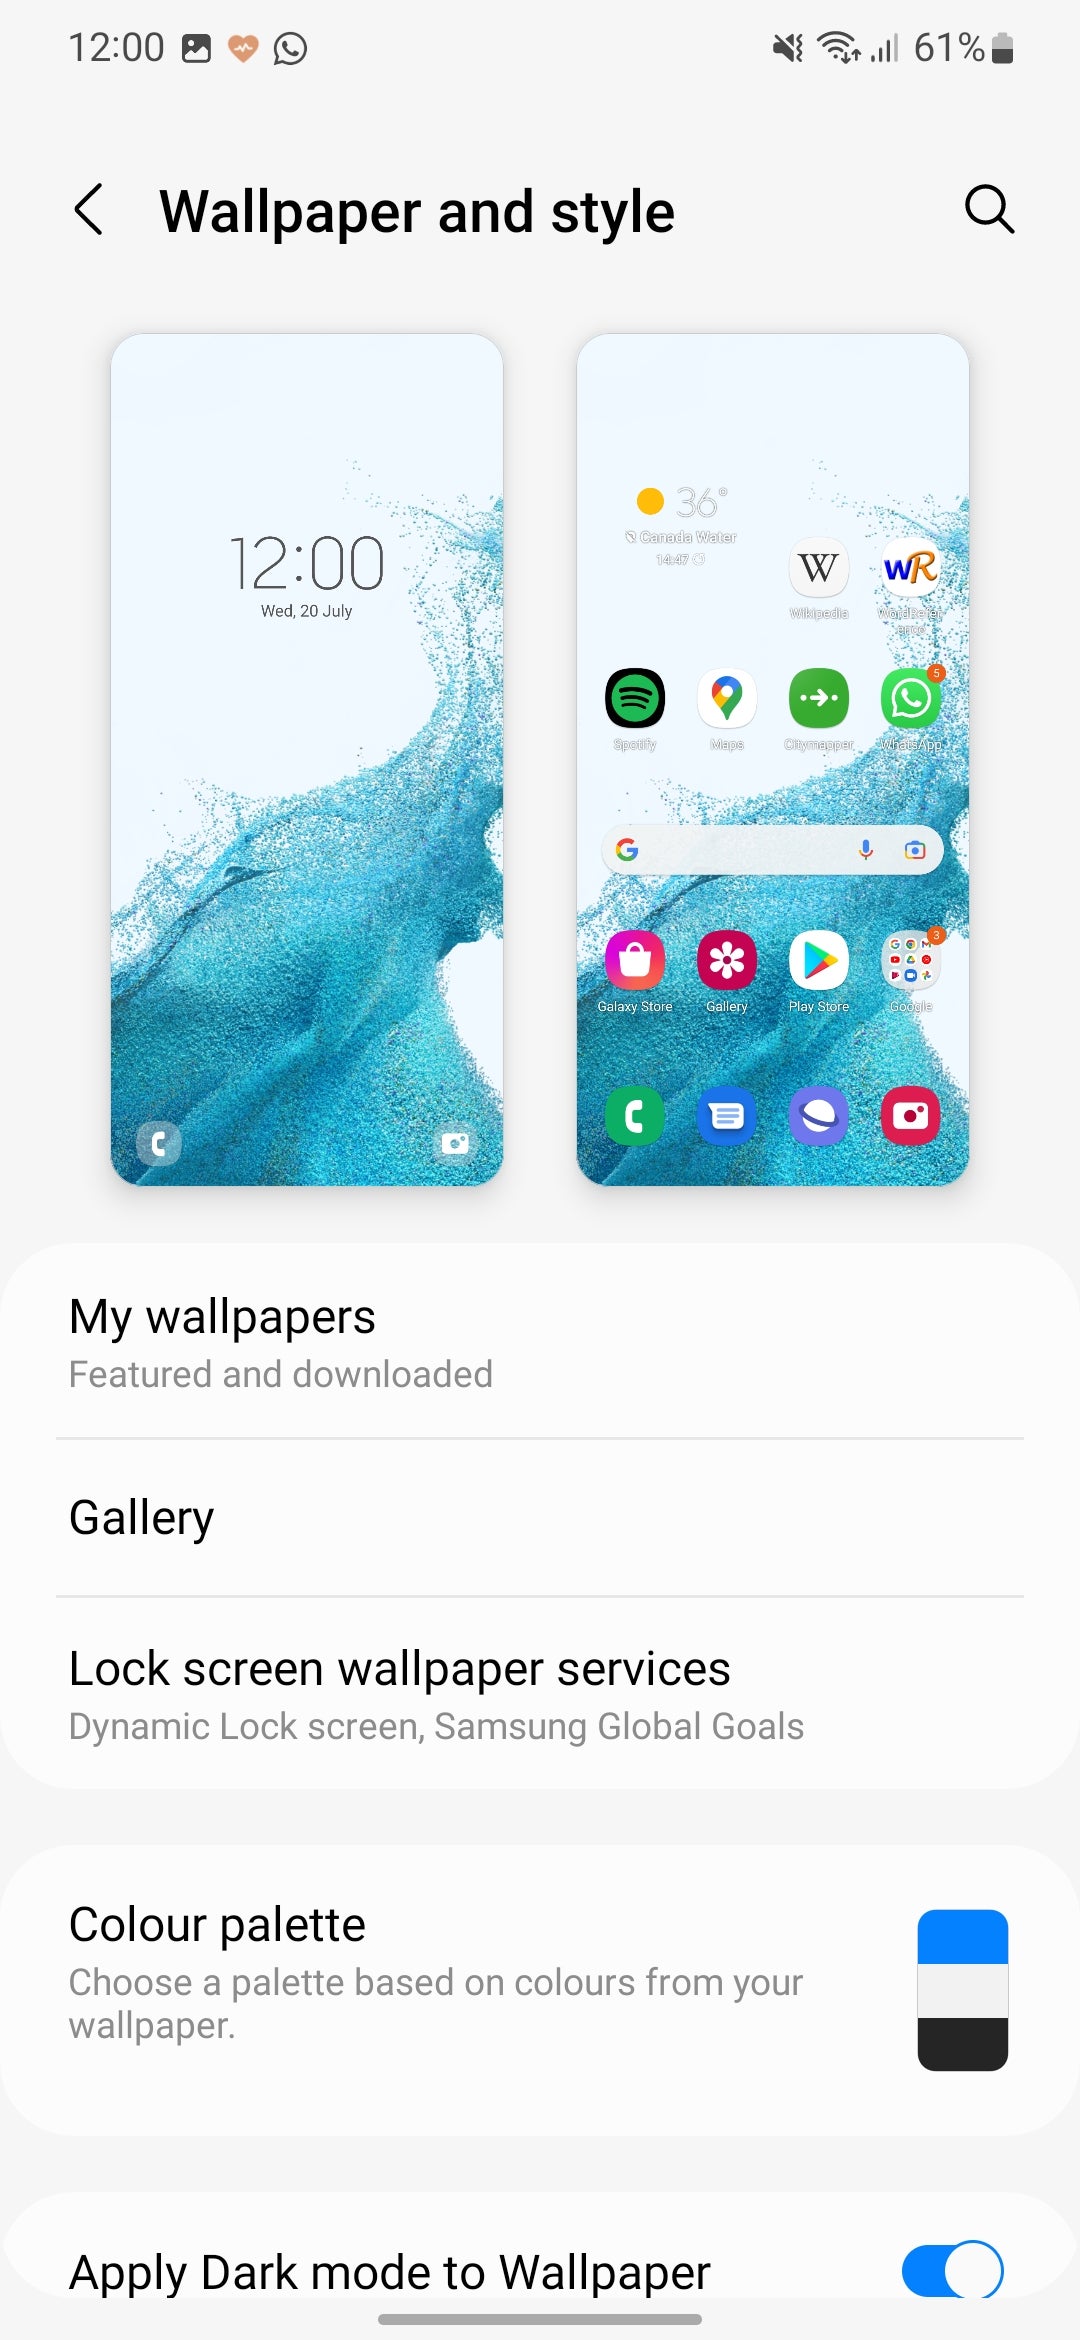 How to change the wallpaper on your Samsung Galaxy phone